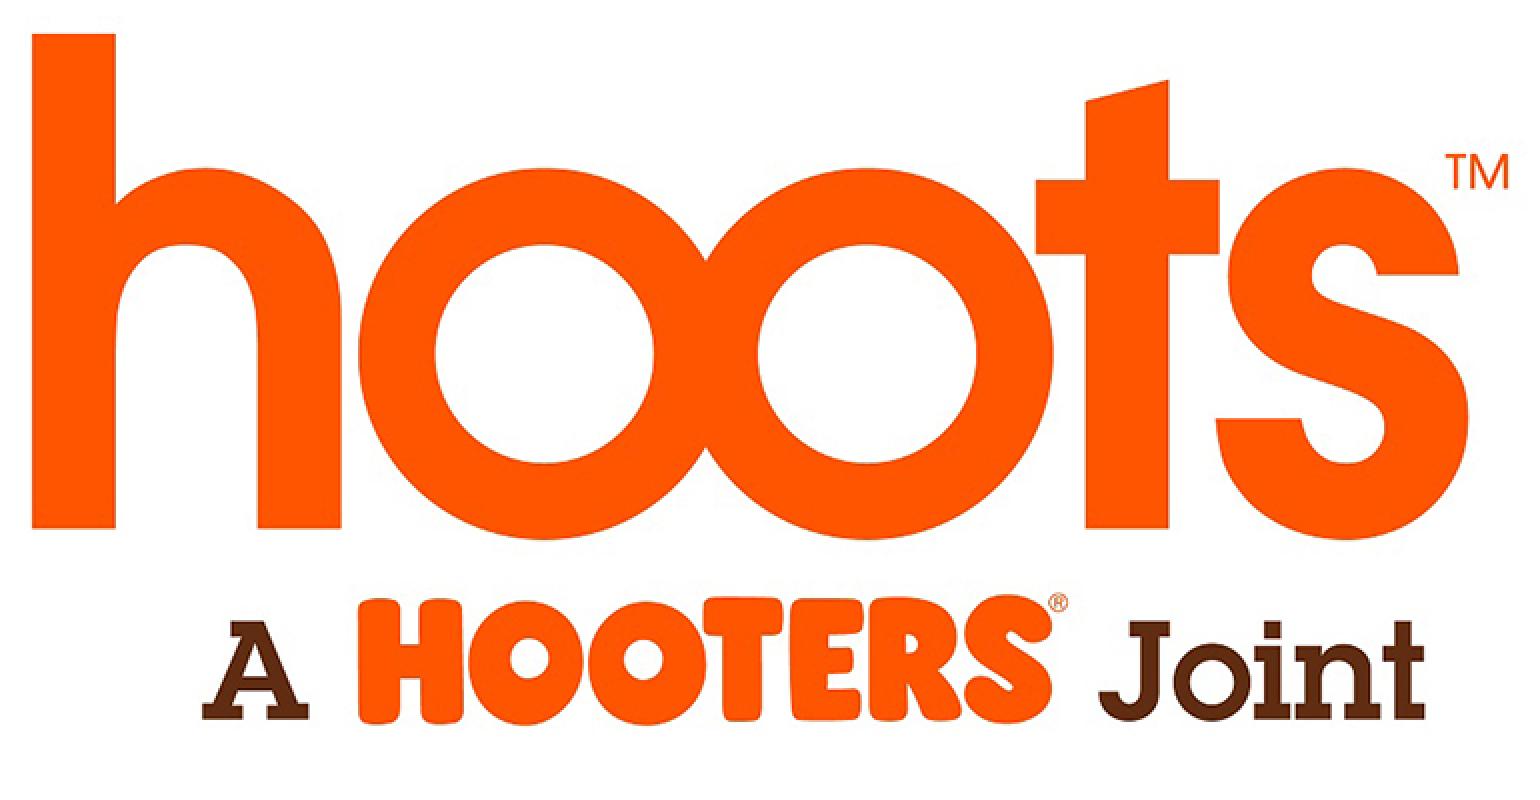 Hooters expanding family-friendly restaurant 'Hoots' without